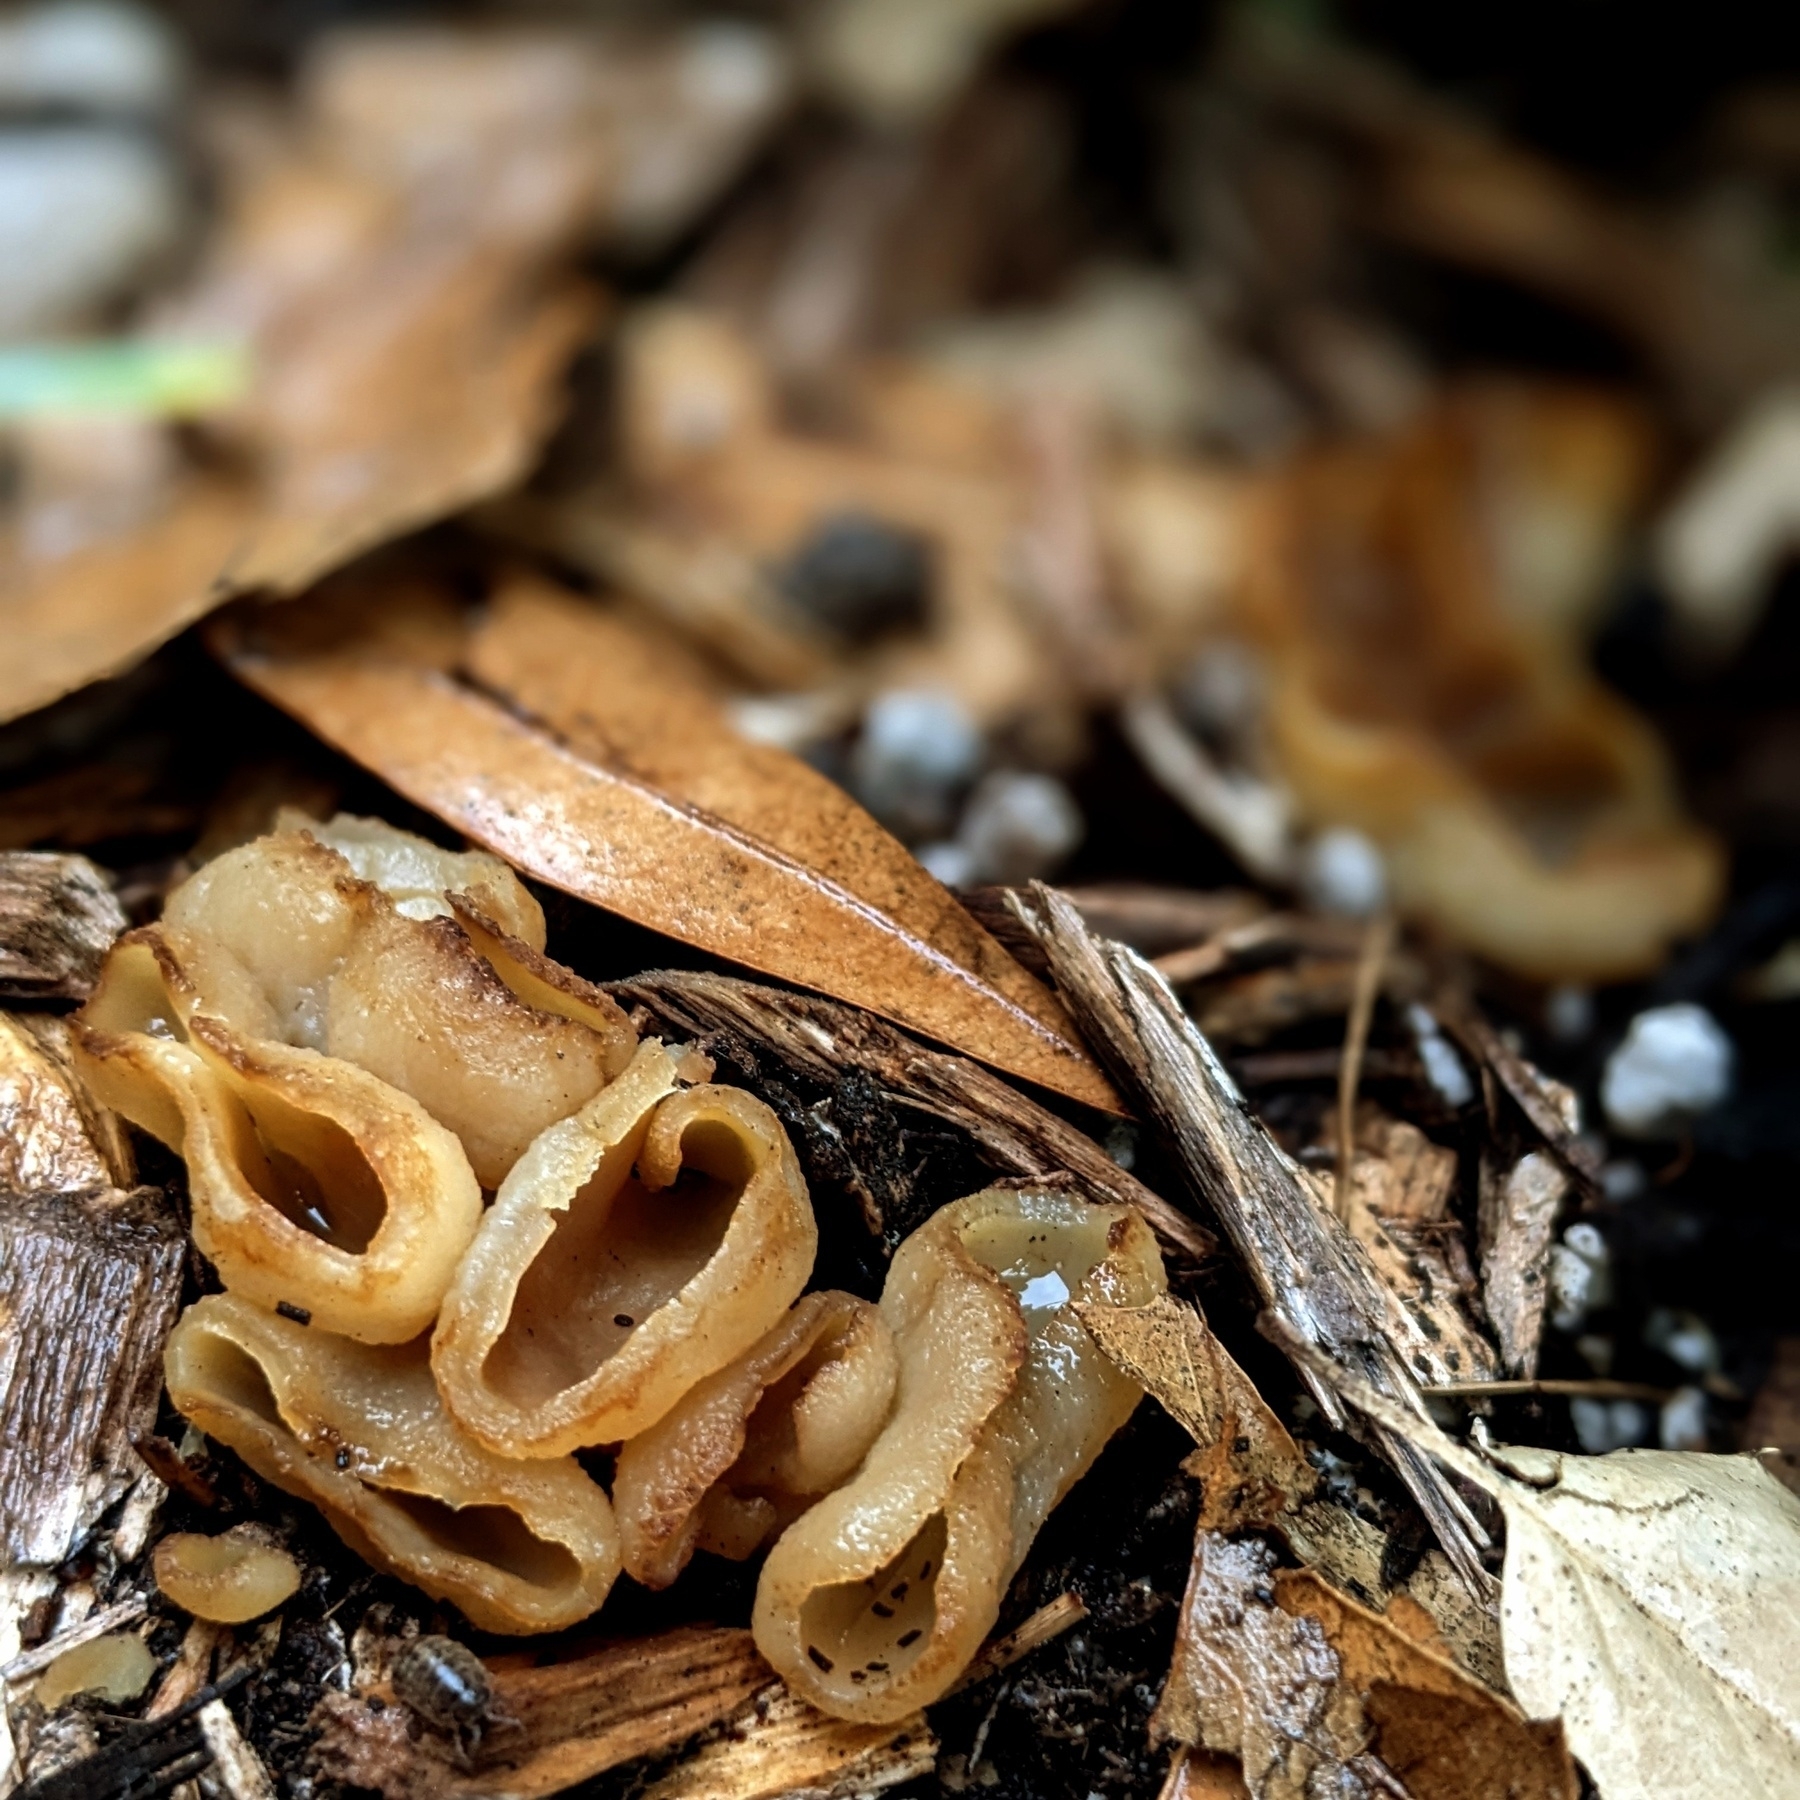 Closeup of some mulch in a garden bed. Growing out of the mulch is a bunch of small light brown cup-shaped mushrooms.